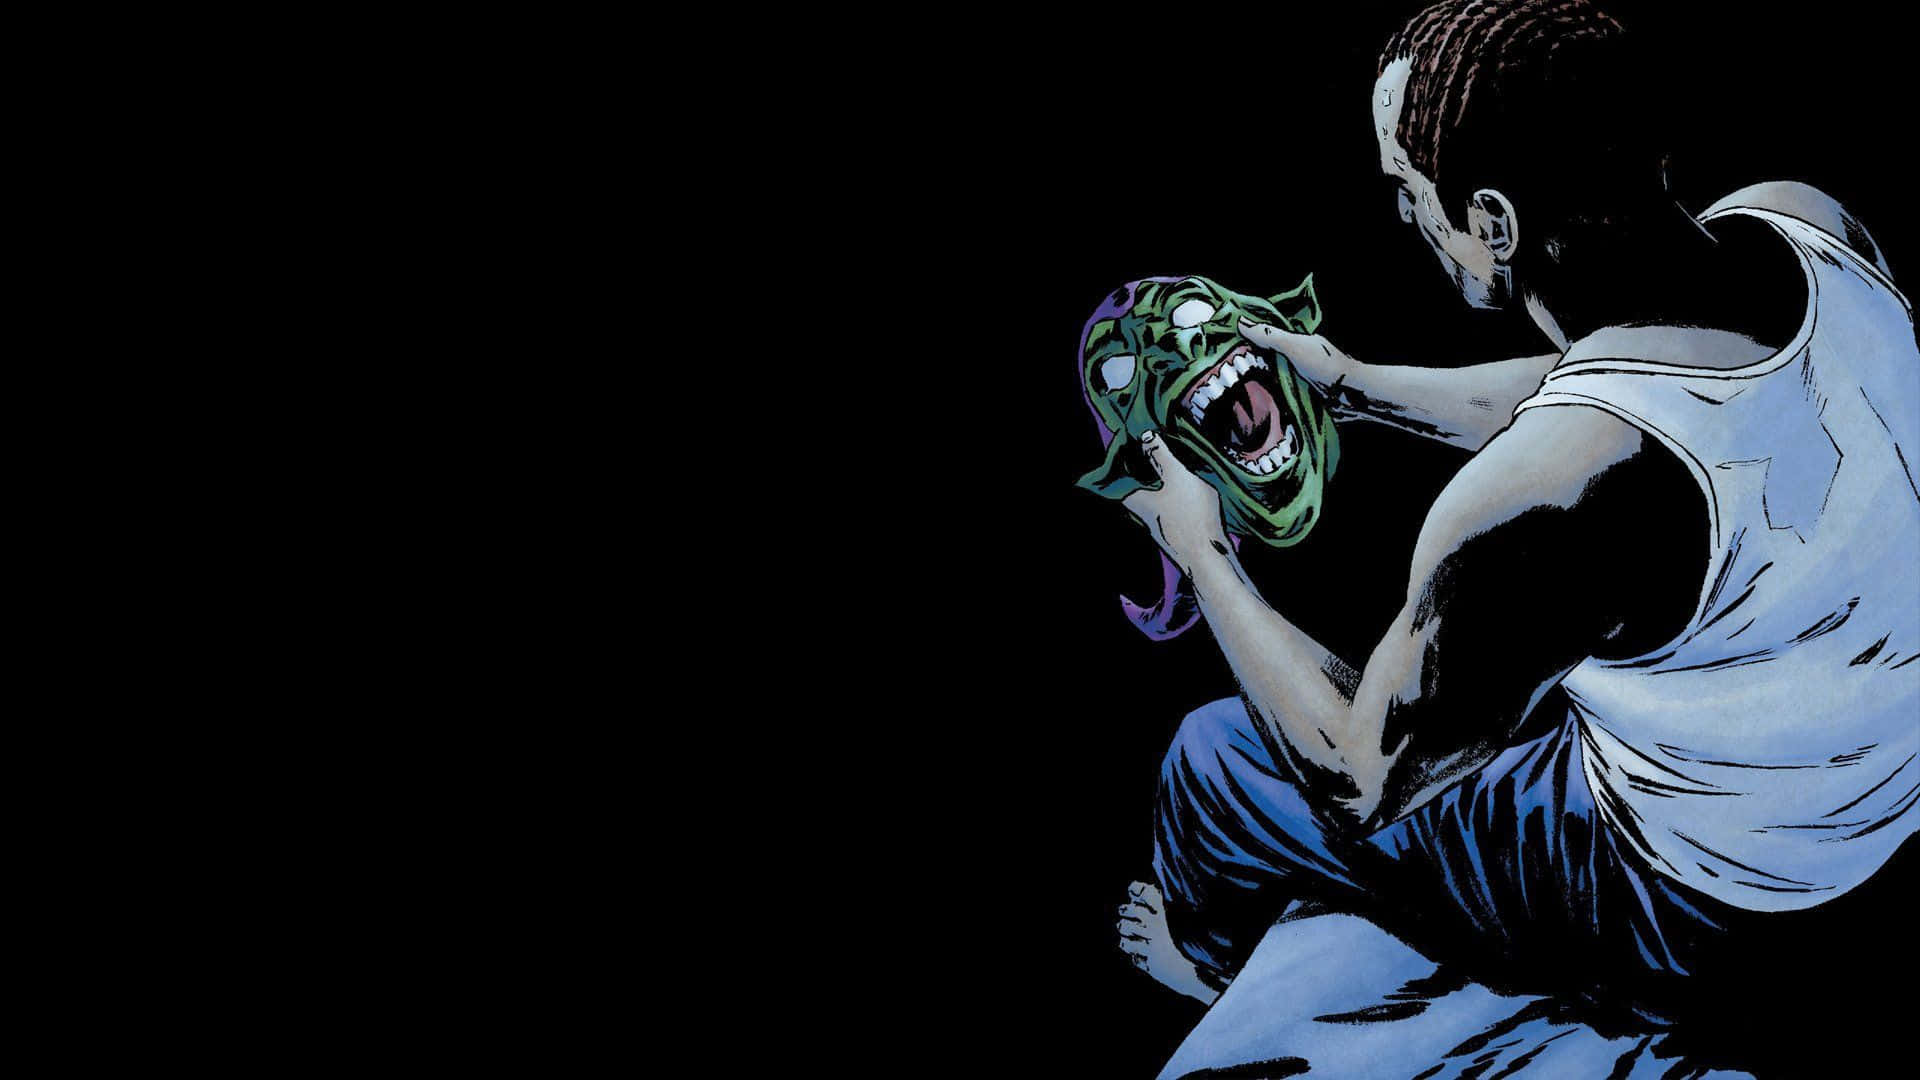 Harry Osborn in action from the comic book series Wallpaper